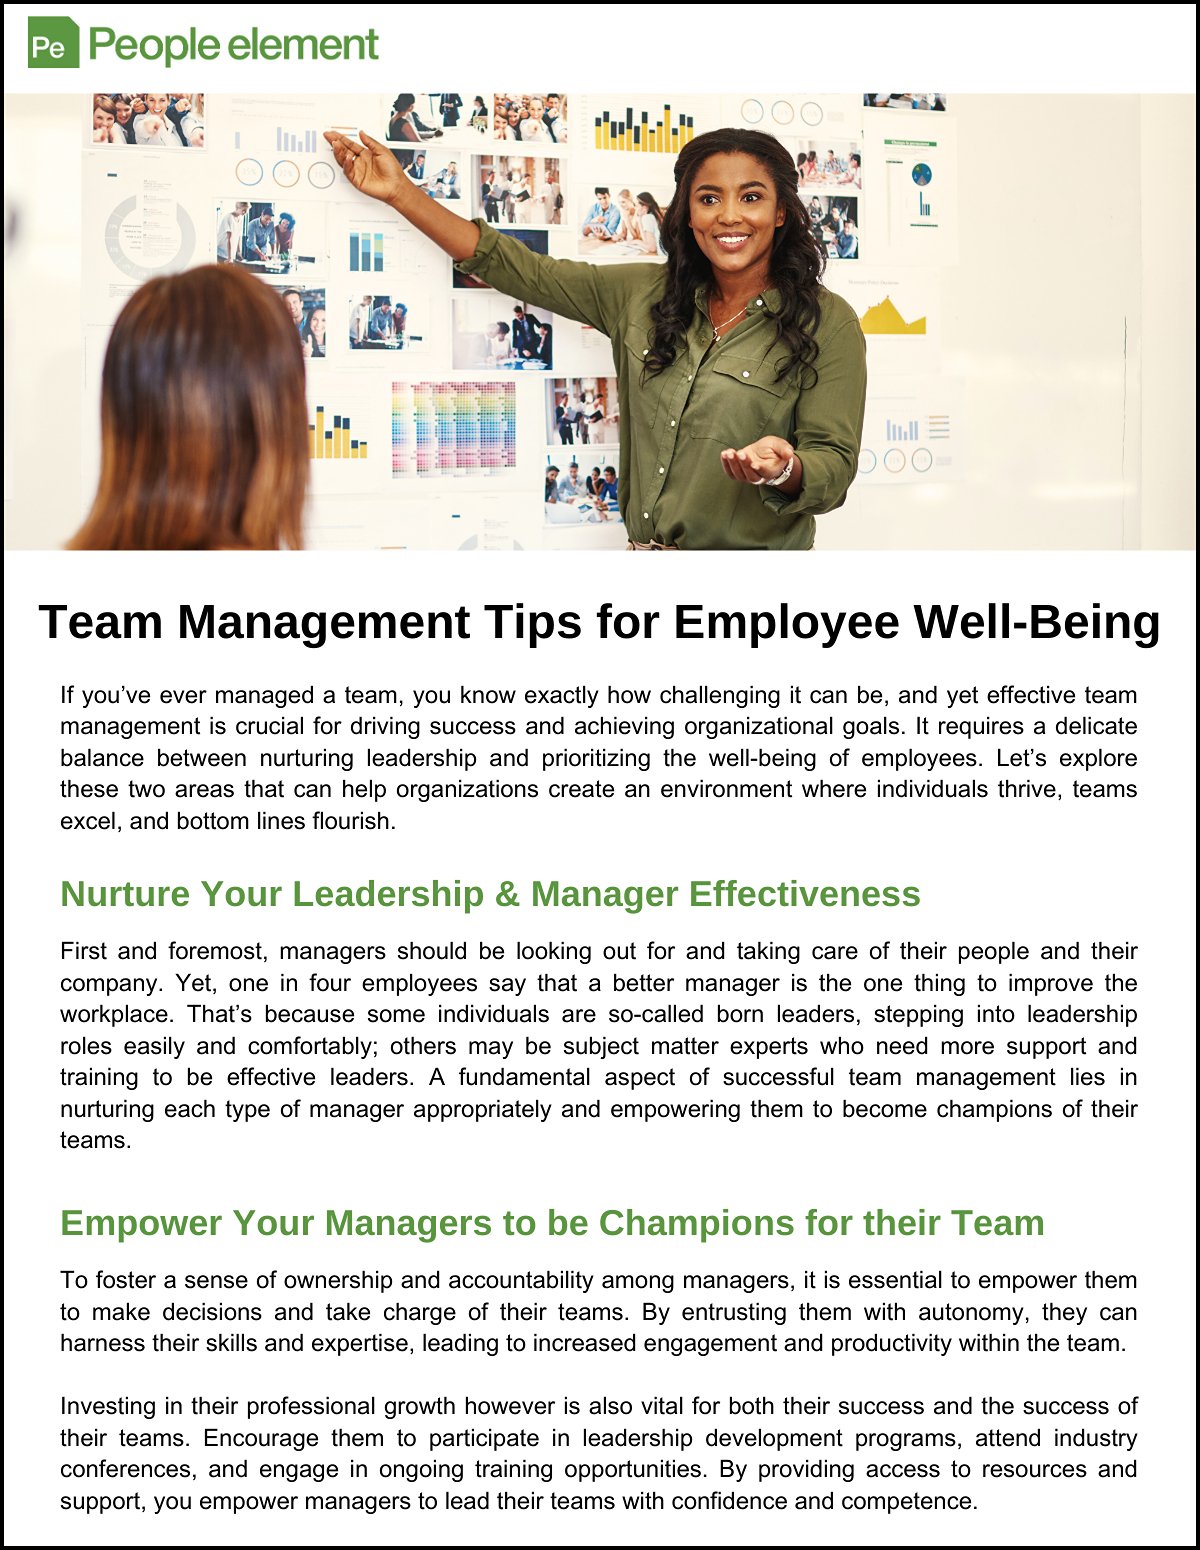 Team Management Tips for Employee Well-Being